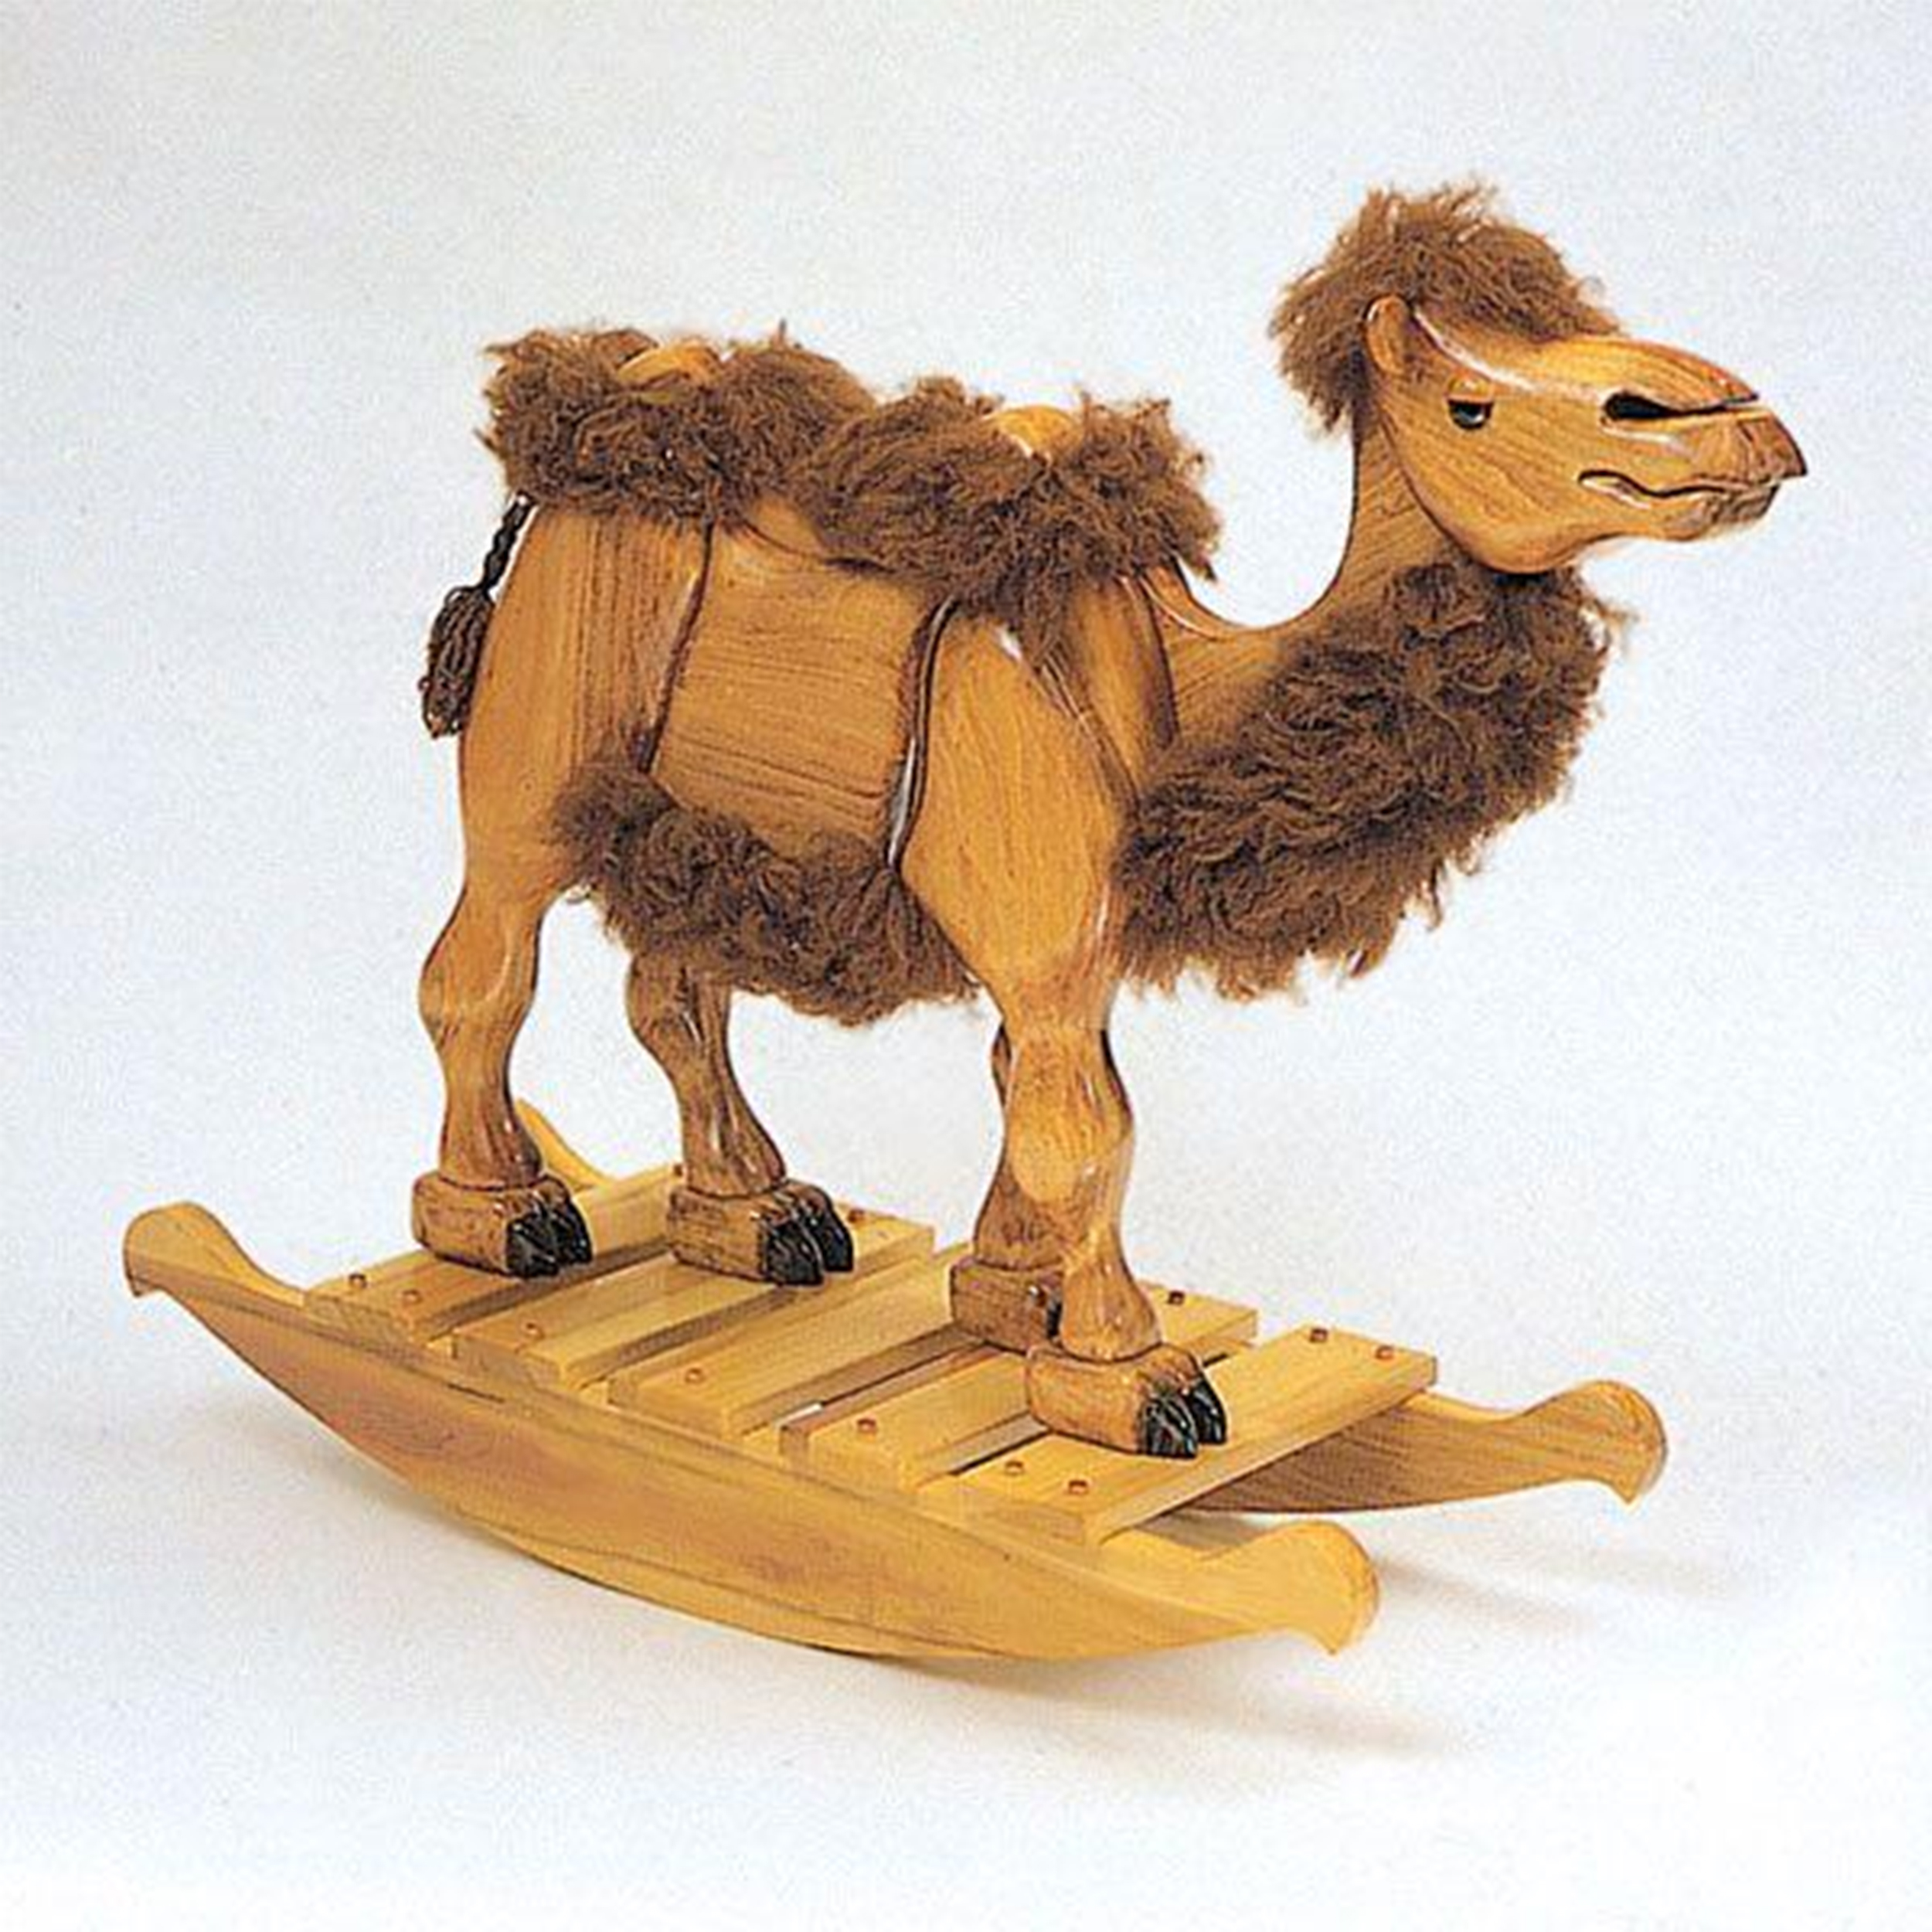 Woodworking Project Paper Plan To Build Lawrence The Camel Rocker